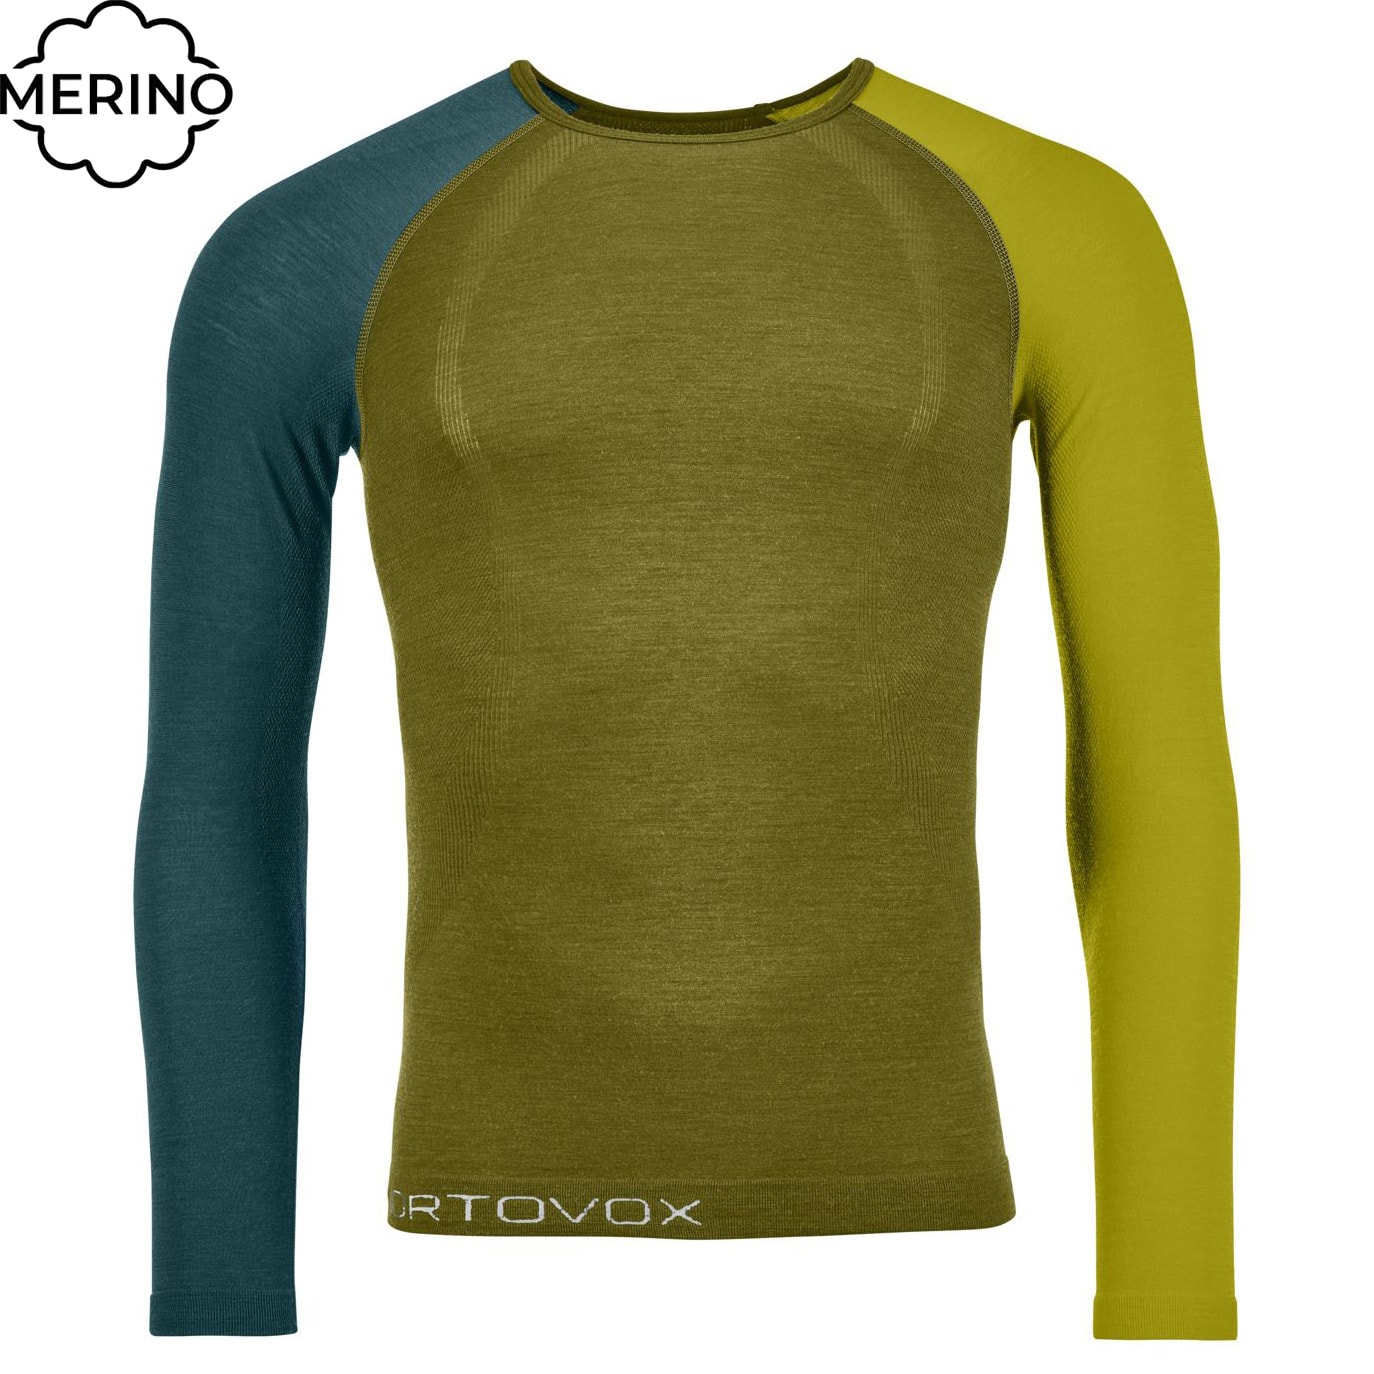 ORTOVOX 120 Competition Light Long Sleeve